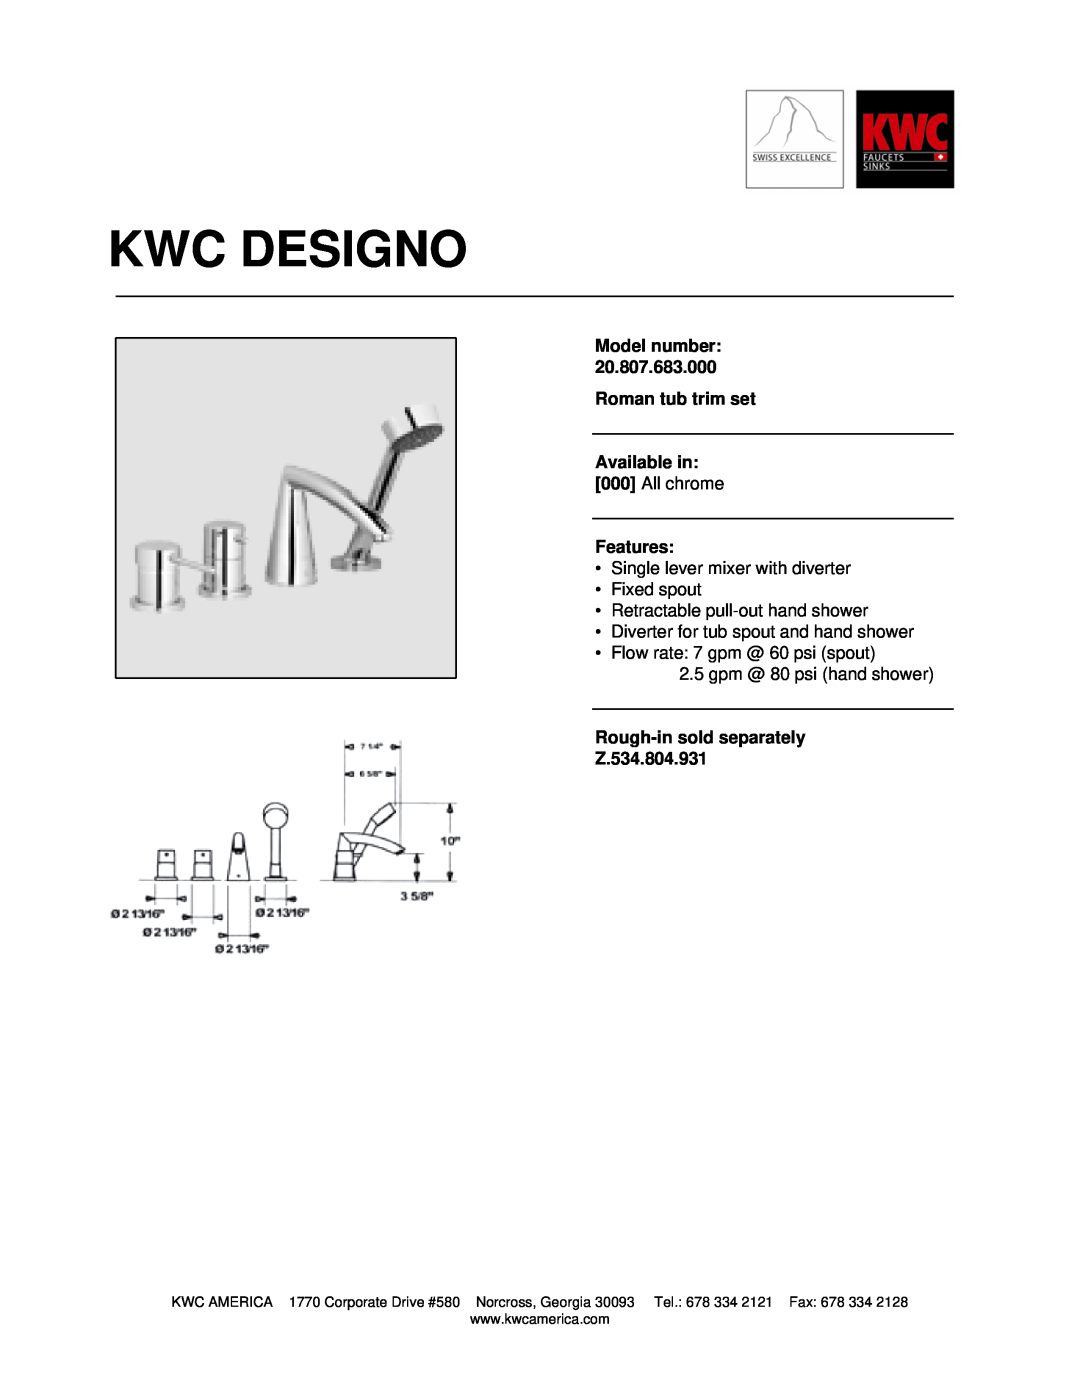 KWC 20.807.683.000 manual Kwc Designo, Model number Roman tub trim set Available in, All chrome, Features 